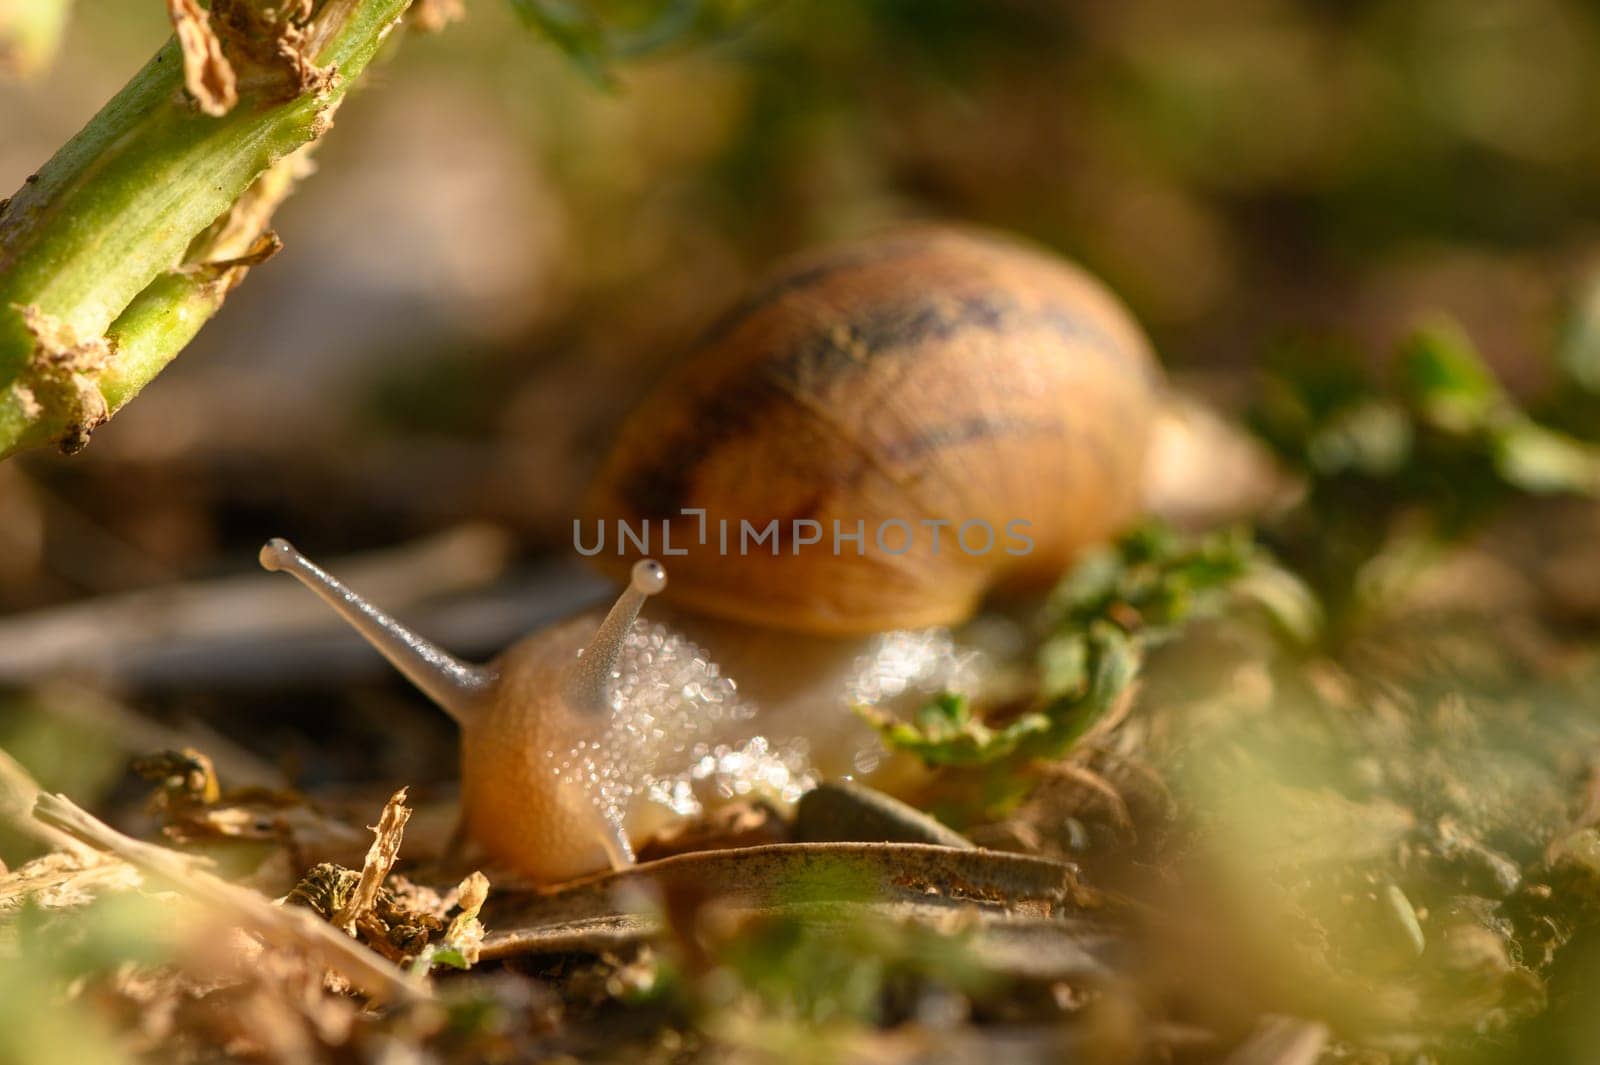 Big snail in shell crawling on road, summer day in garden 1 by Mixa74